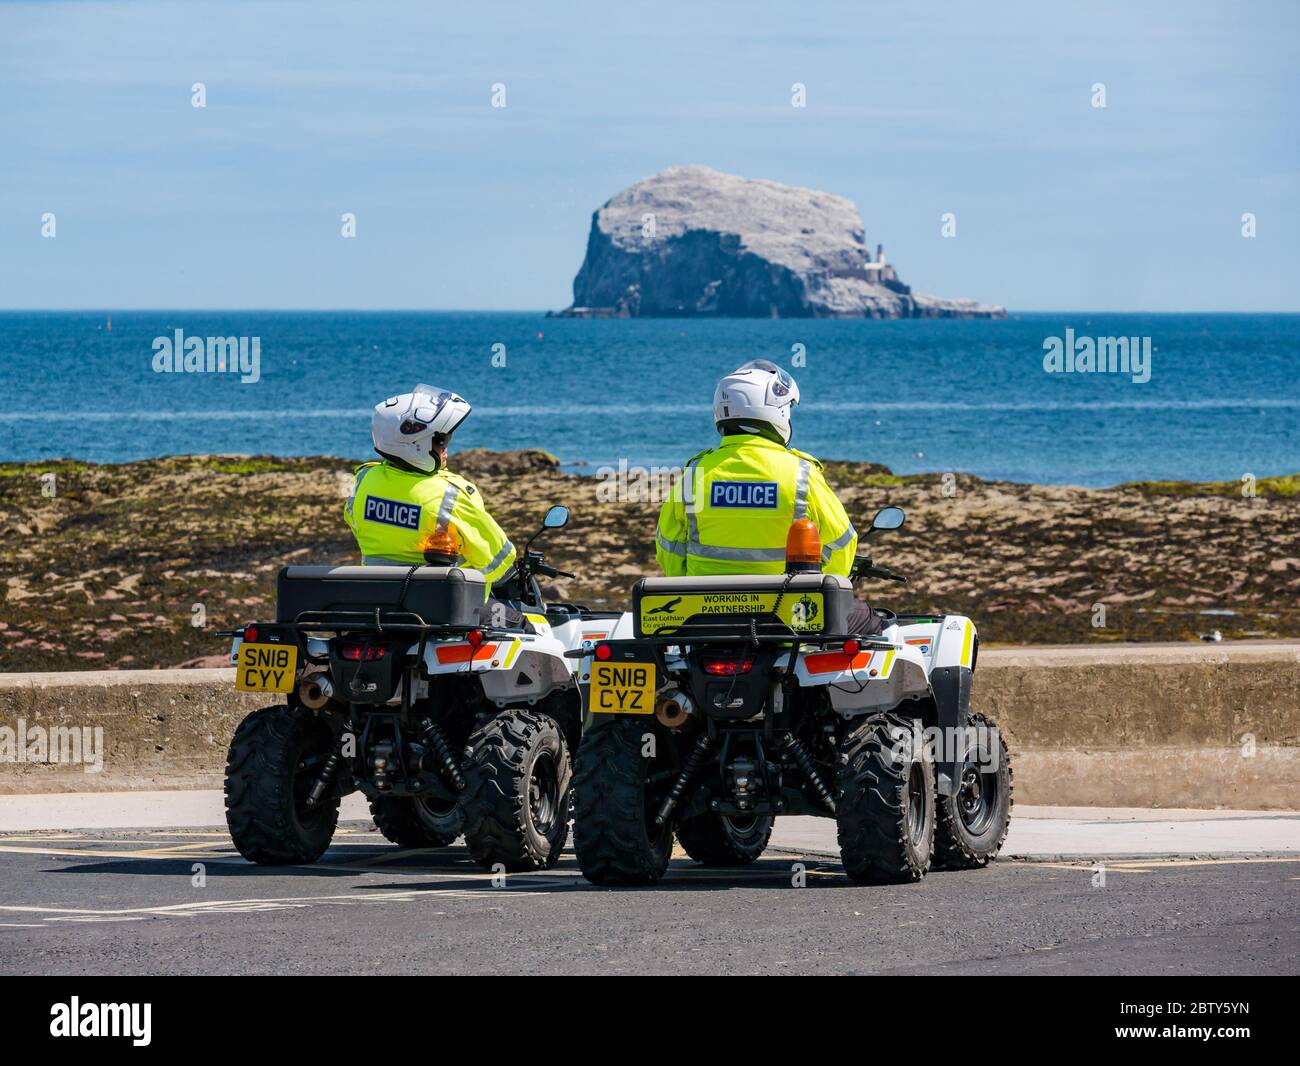 North Berwick, East Lothian, Scotland, United Kingdom, 28th May 2020. Easing of lockdown restrictions: with the Scottish Government set to announce the lifting of some lockdown restrictions today, there are already signs that things are beginning to return to normal in the popular seaside town. Police on quad bikes patrol the beach during lockdown and pause for a rest stop in Milsey Bay with the bass Rock gannet colony on the horizon on a sunny day Stock Photo